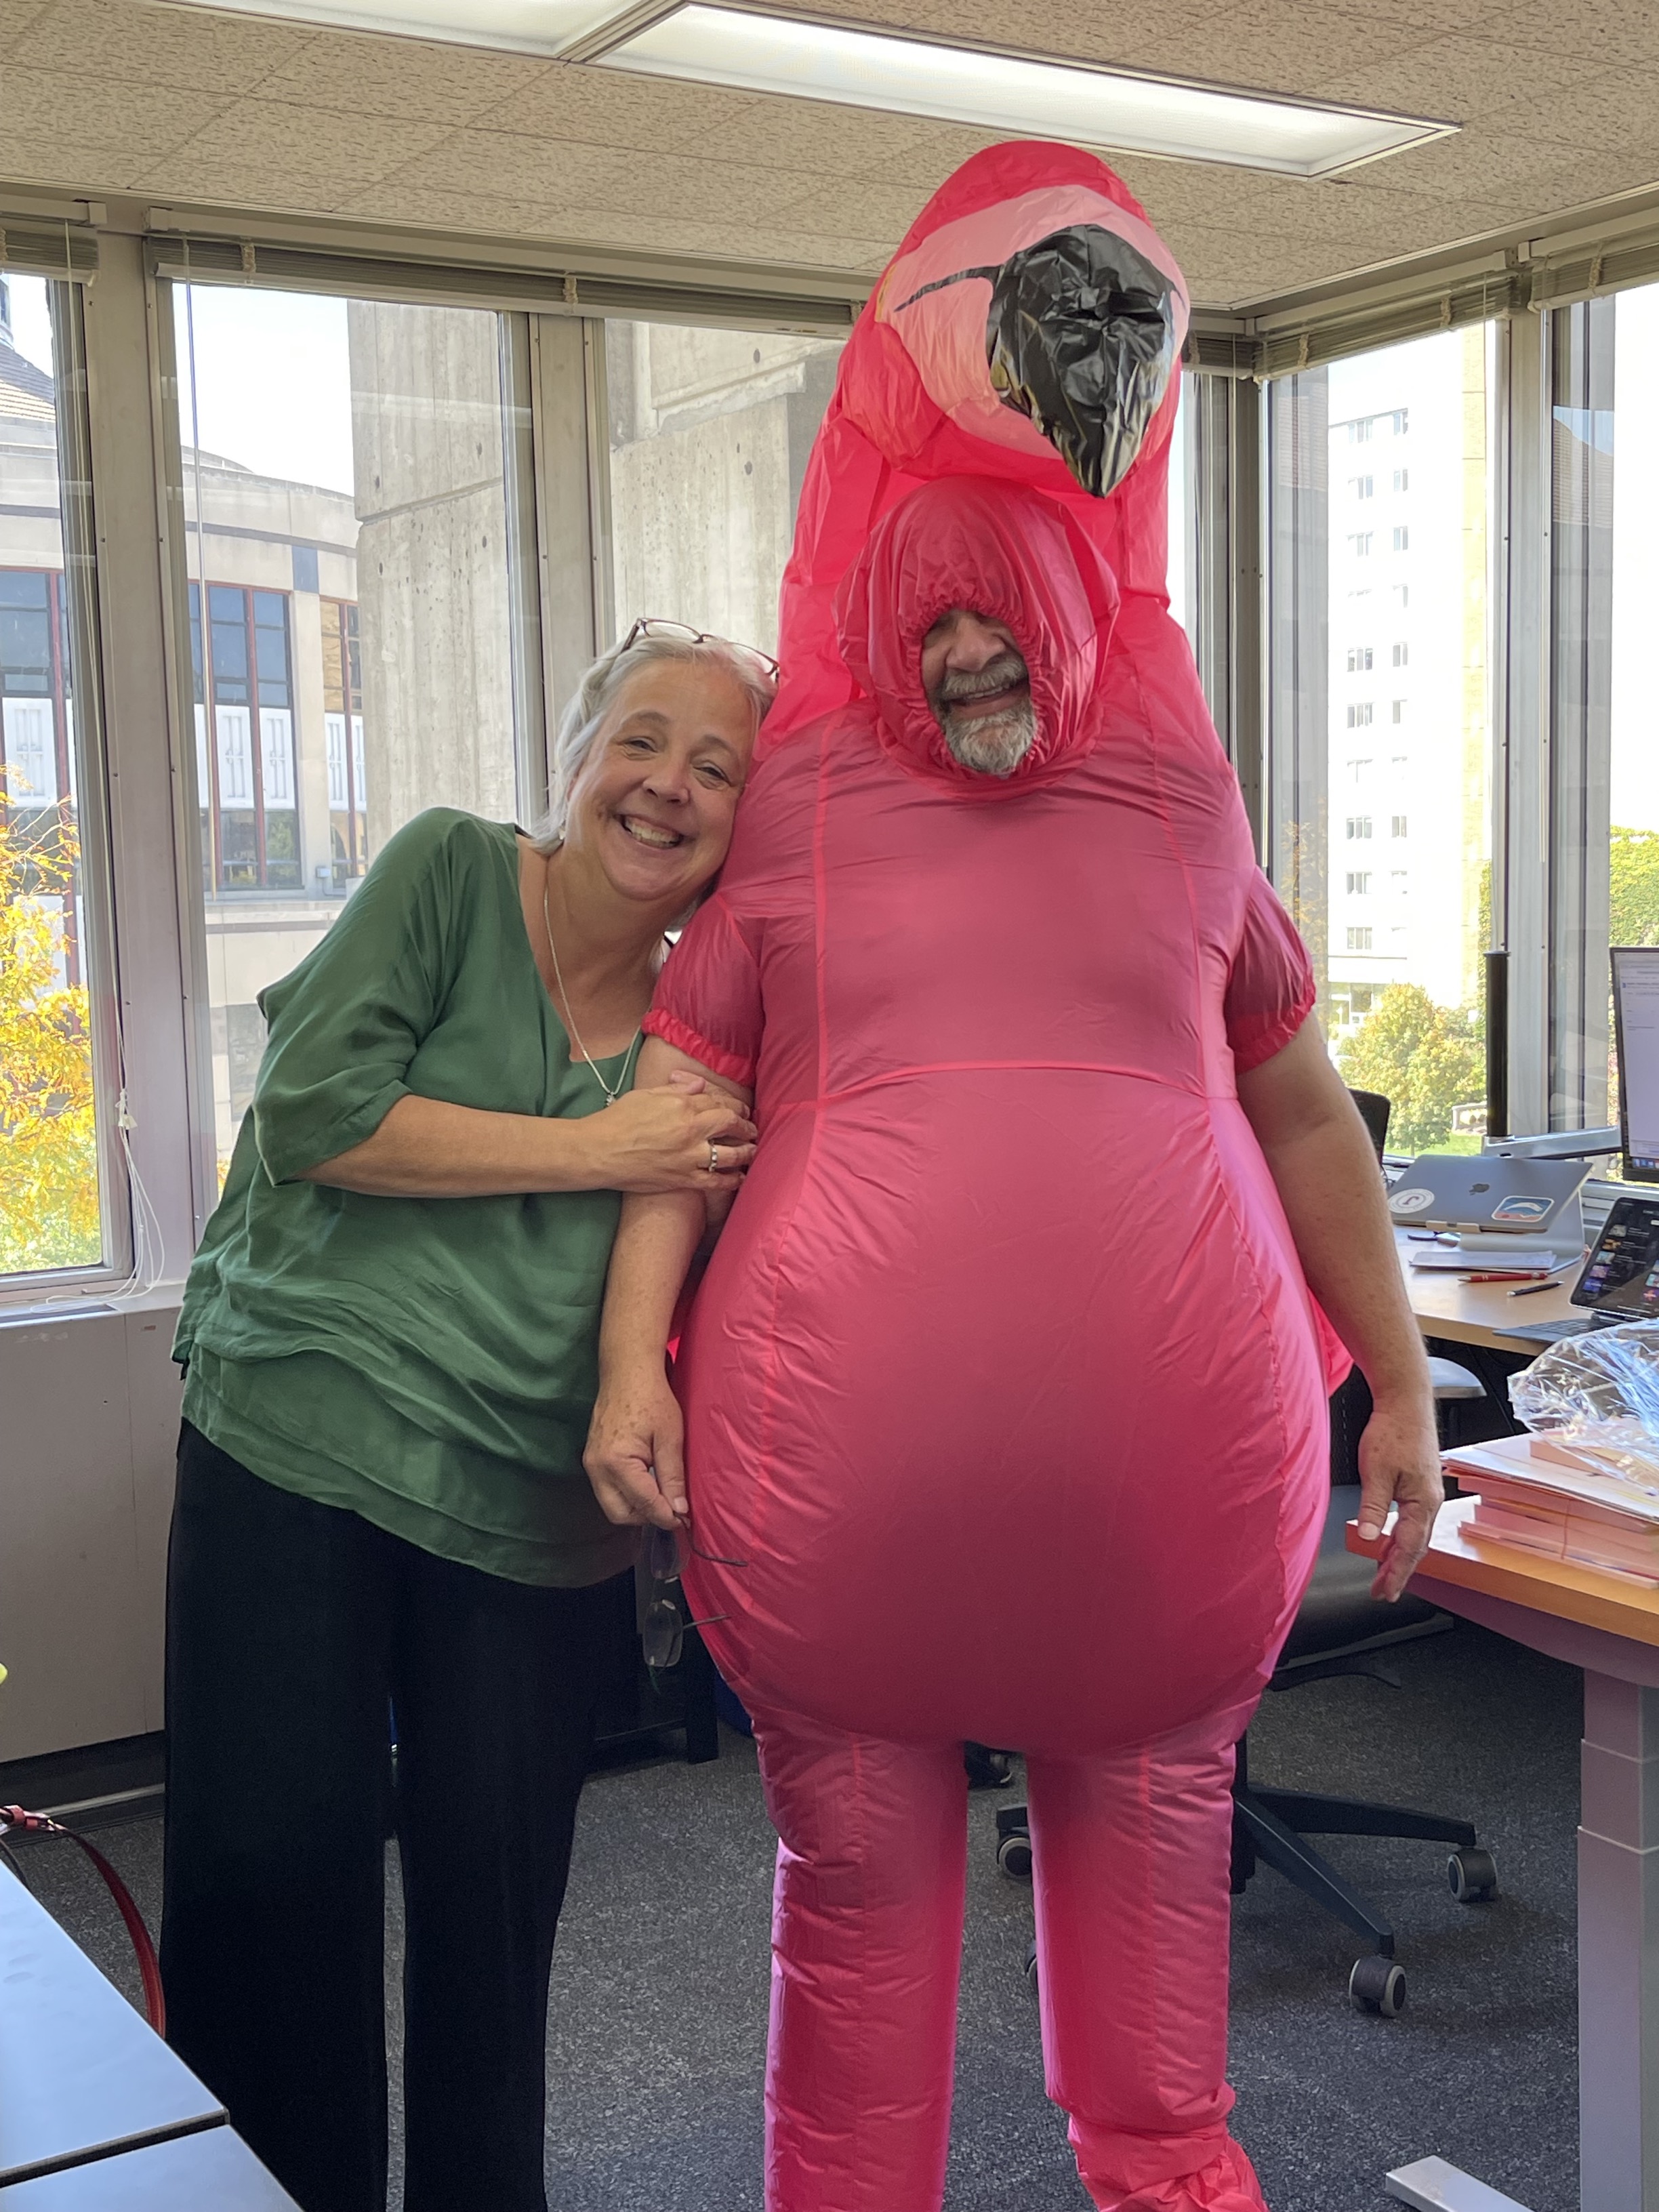 Professor Doug McLeod wears a flamingo costume and poses with director Katy Culver